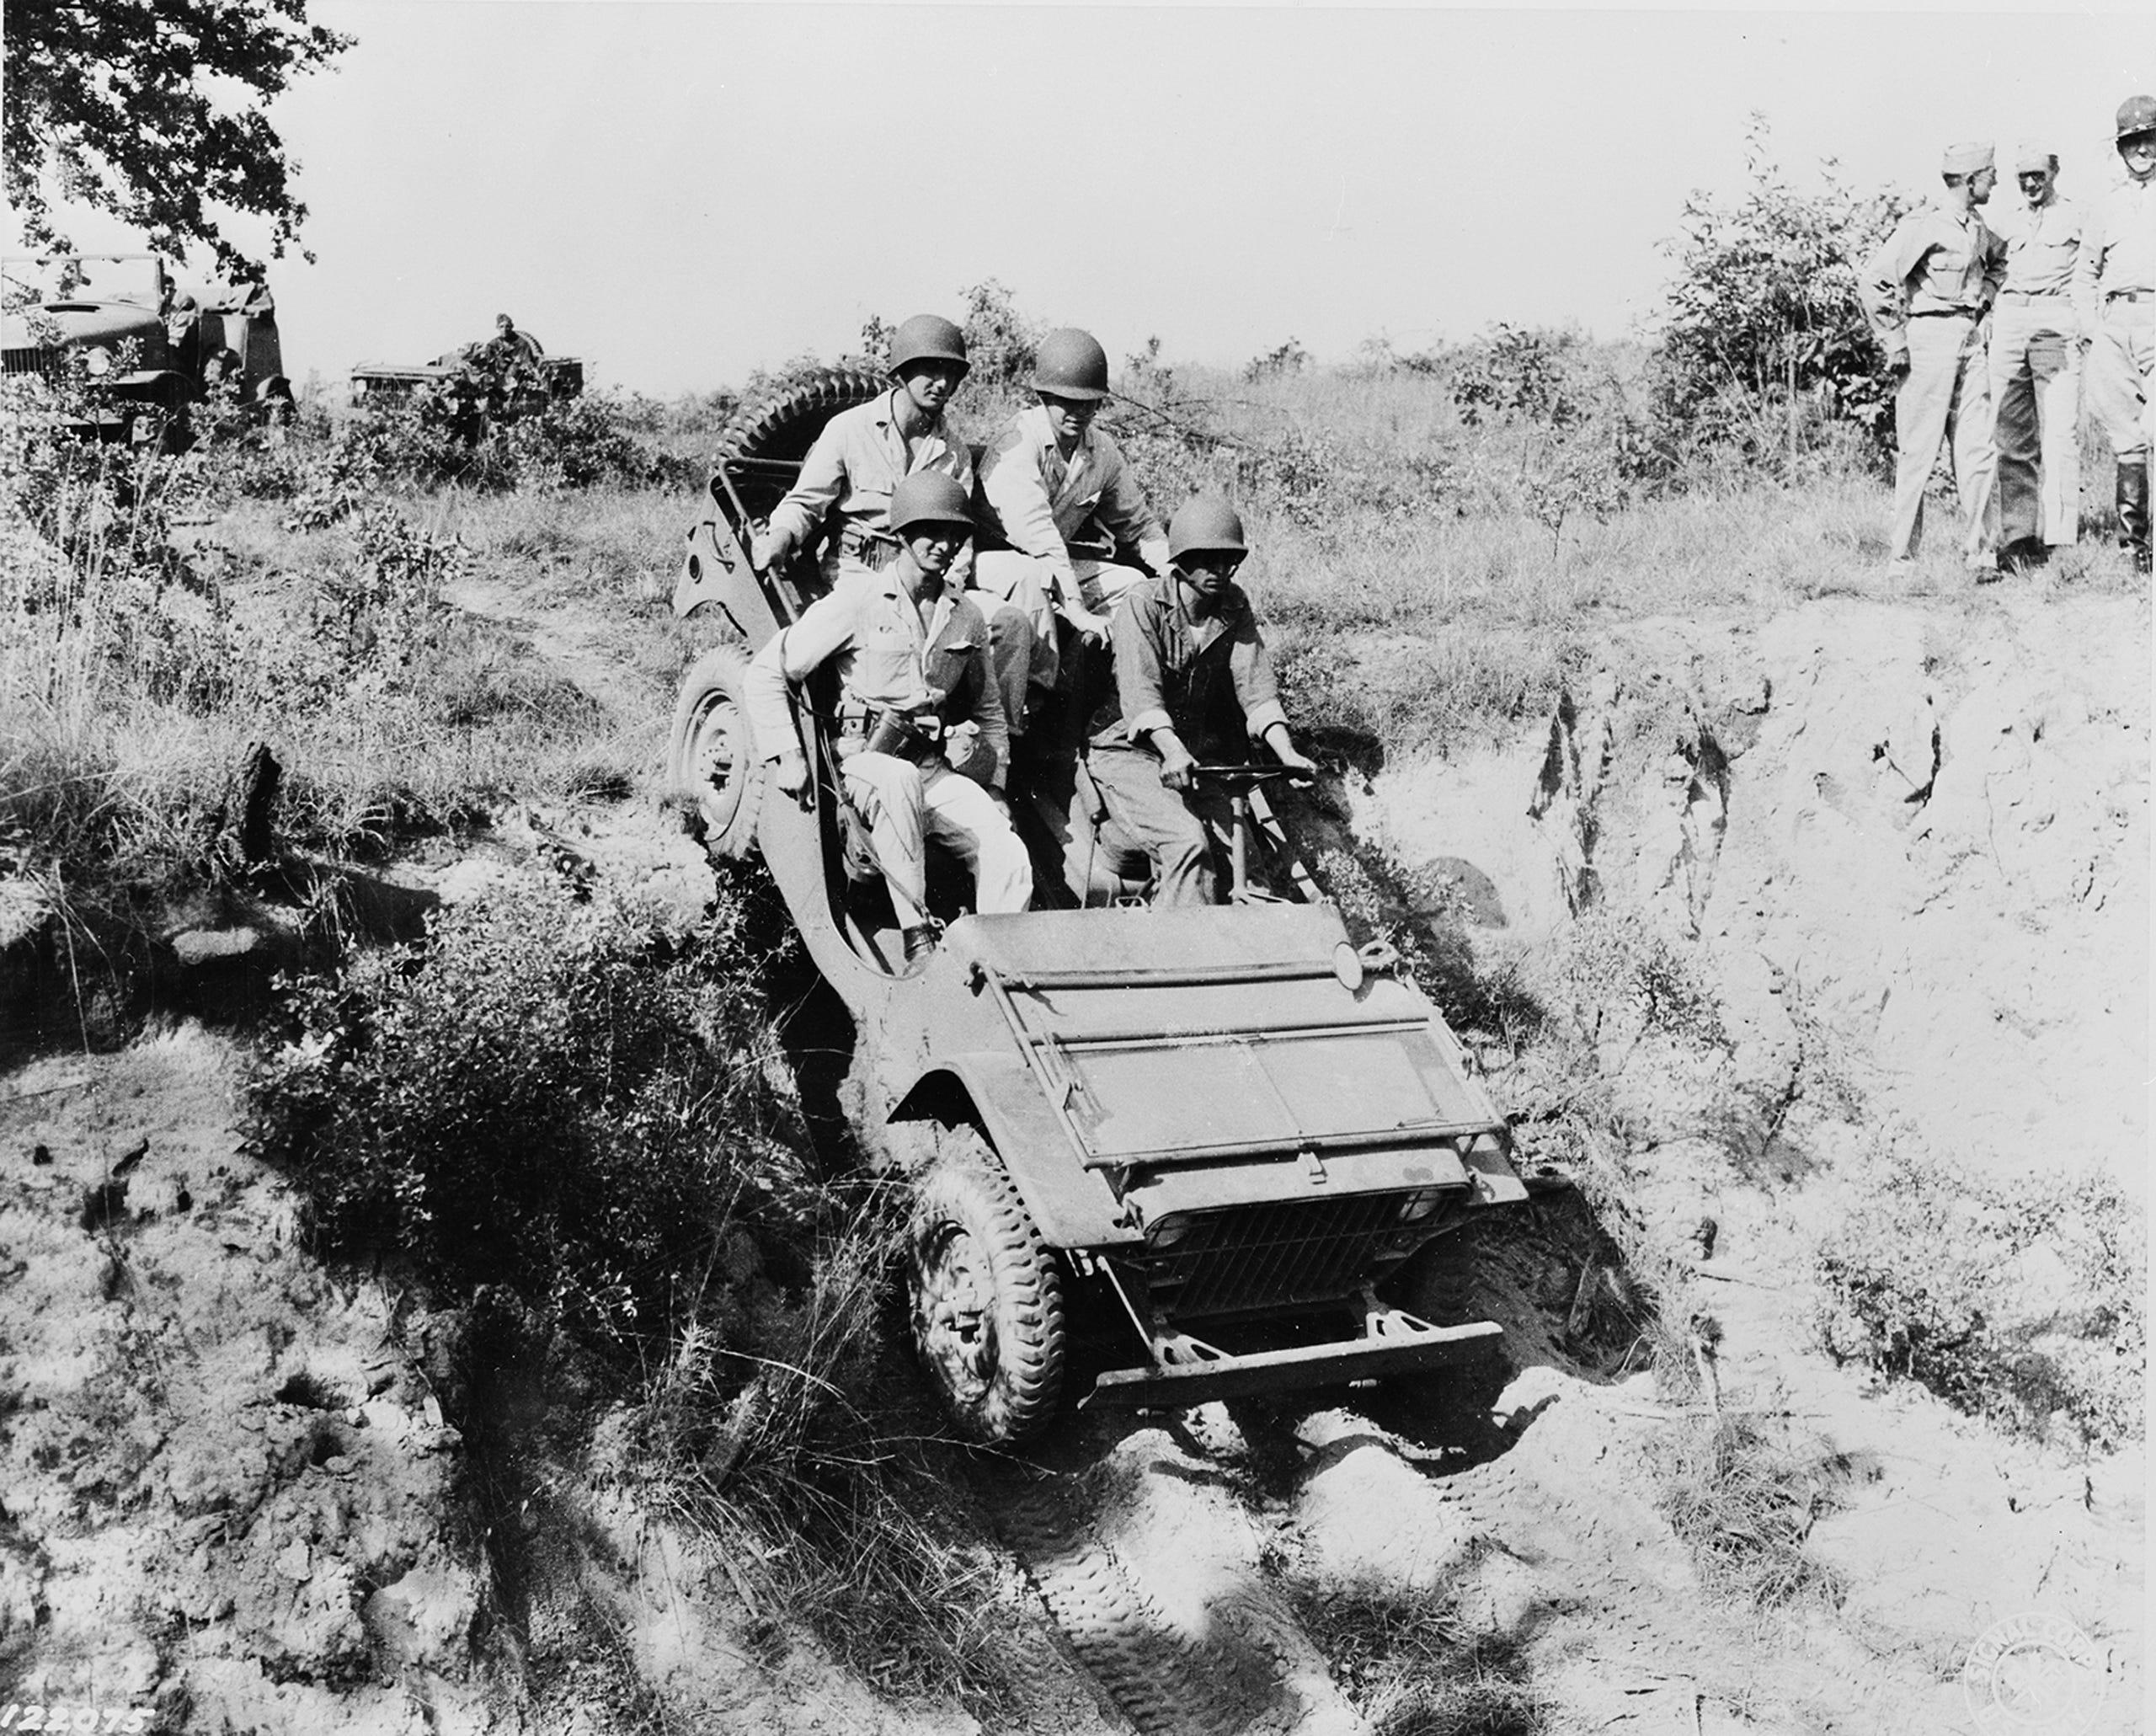 West Point cadets and a U.S. Army soldier drive a Jeep at Fort Benning, Georgia, in 1942. The rugged Jeep brand dates back to 1940, when the Army solicited bids for a 1/4 ton "light reconnaissance" vehicle.